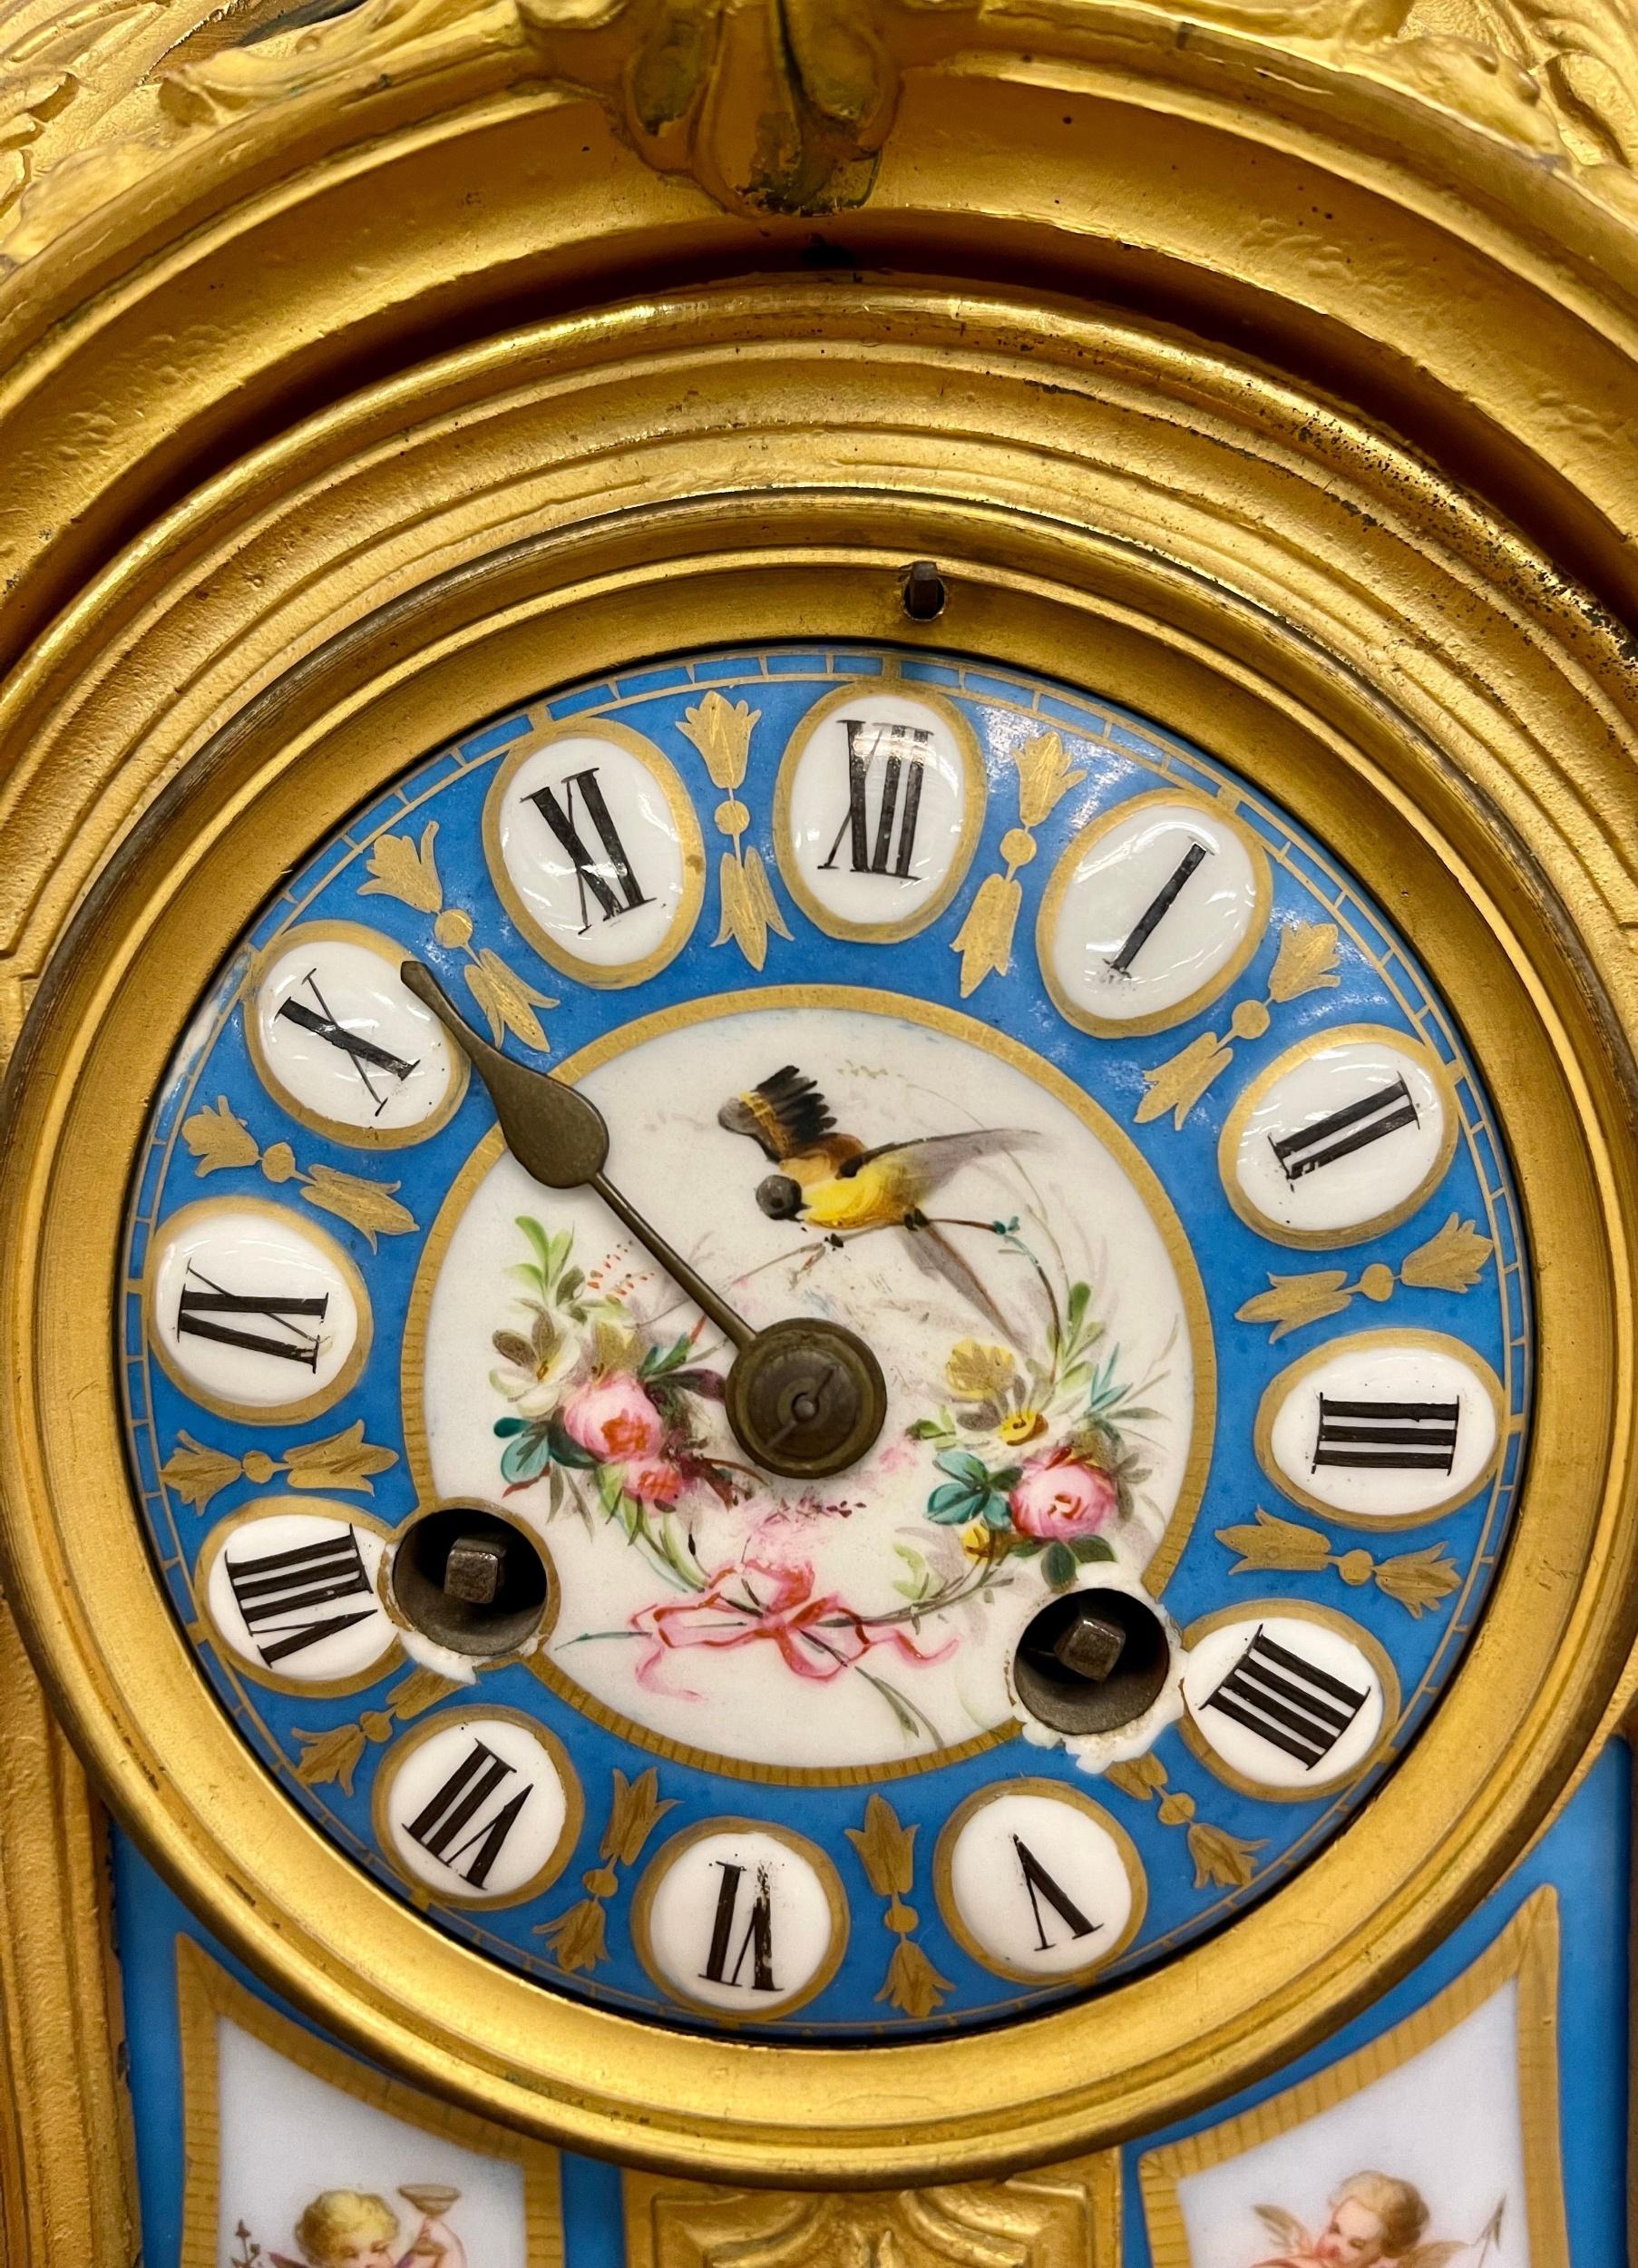 Louis XVI Dore bronze mantle clock, Conrad Felsing, Berlin. A finely cast dore' bronze mantle clock with Sevres porcelain face and decorative plaques. A fine example of the Belle Époque era. Not in working order, missing key, minute hand and